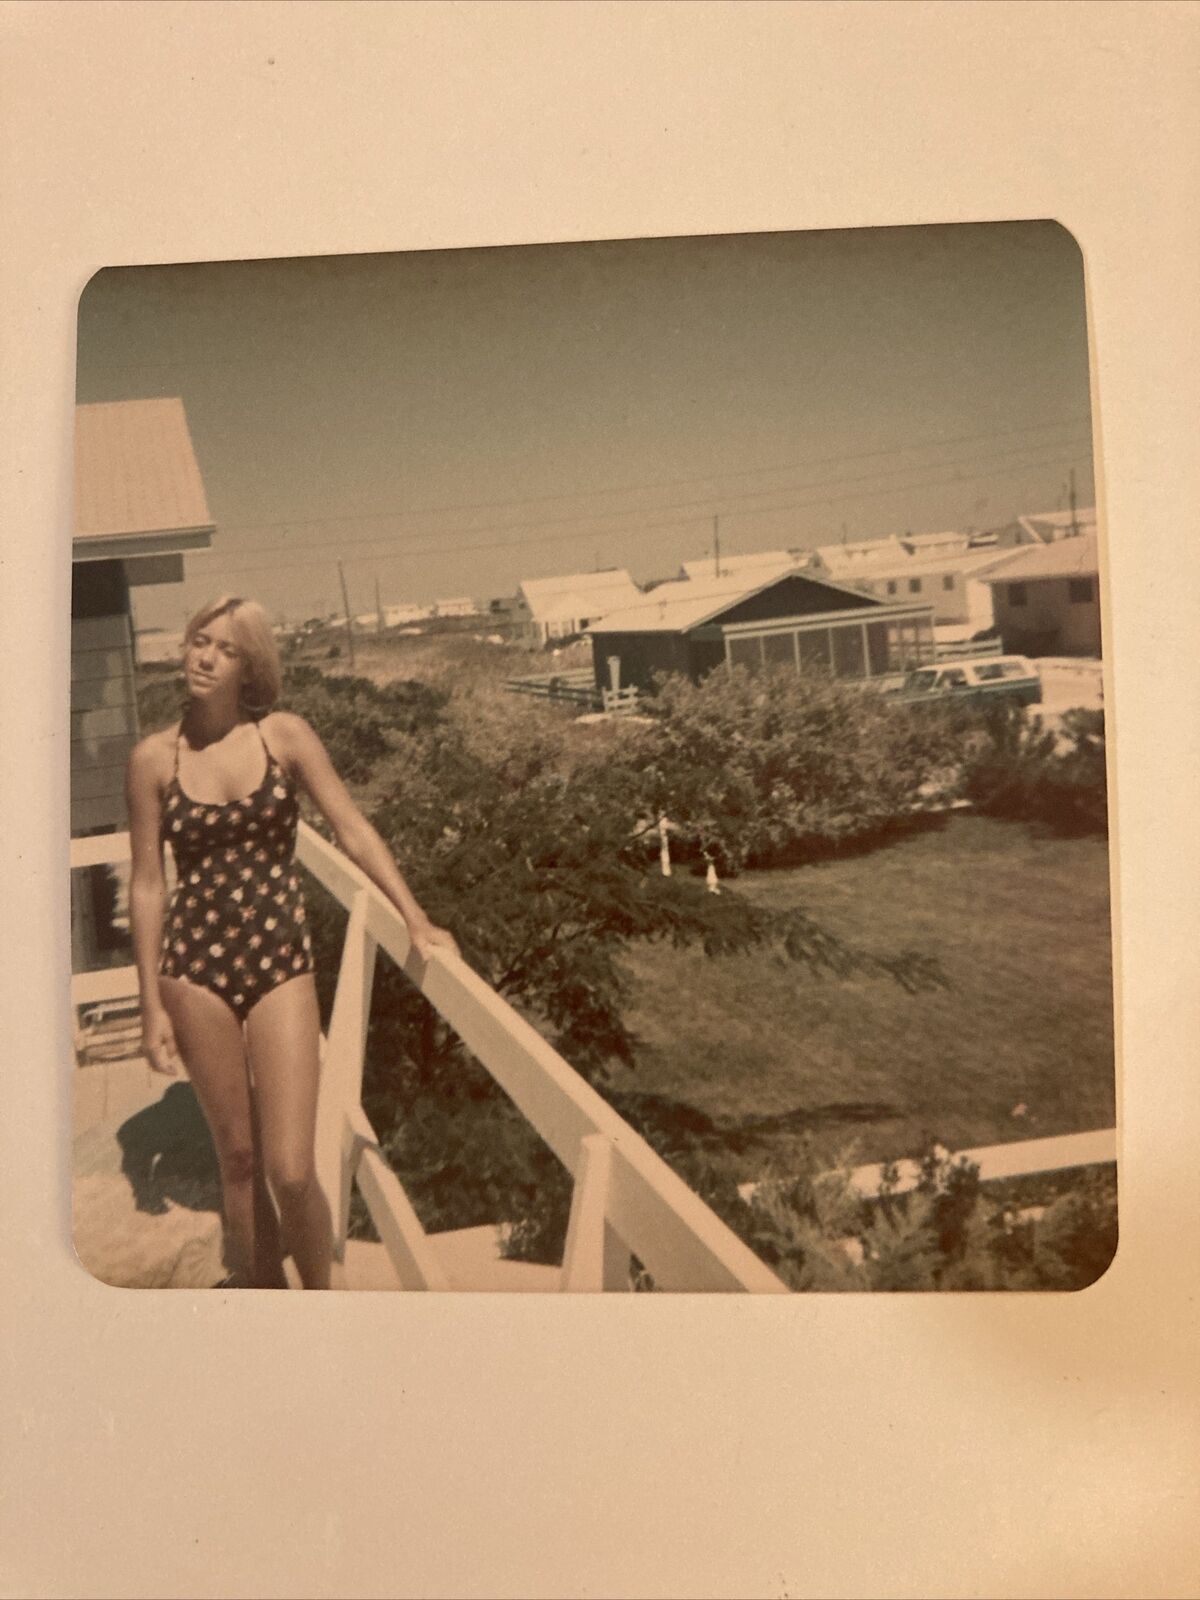 Ocean City new Houses Girl On Deck FOUND PHOTOGRAPH original 1976 LOST PICTURES